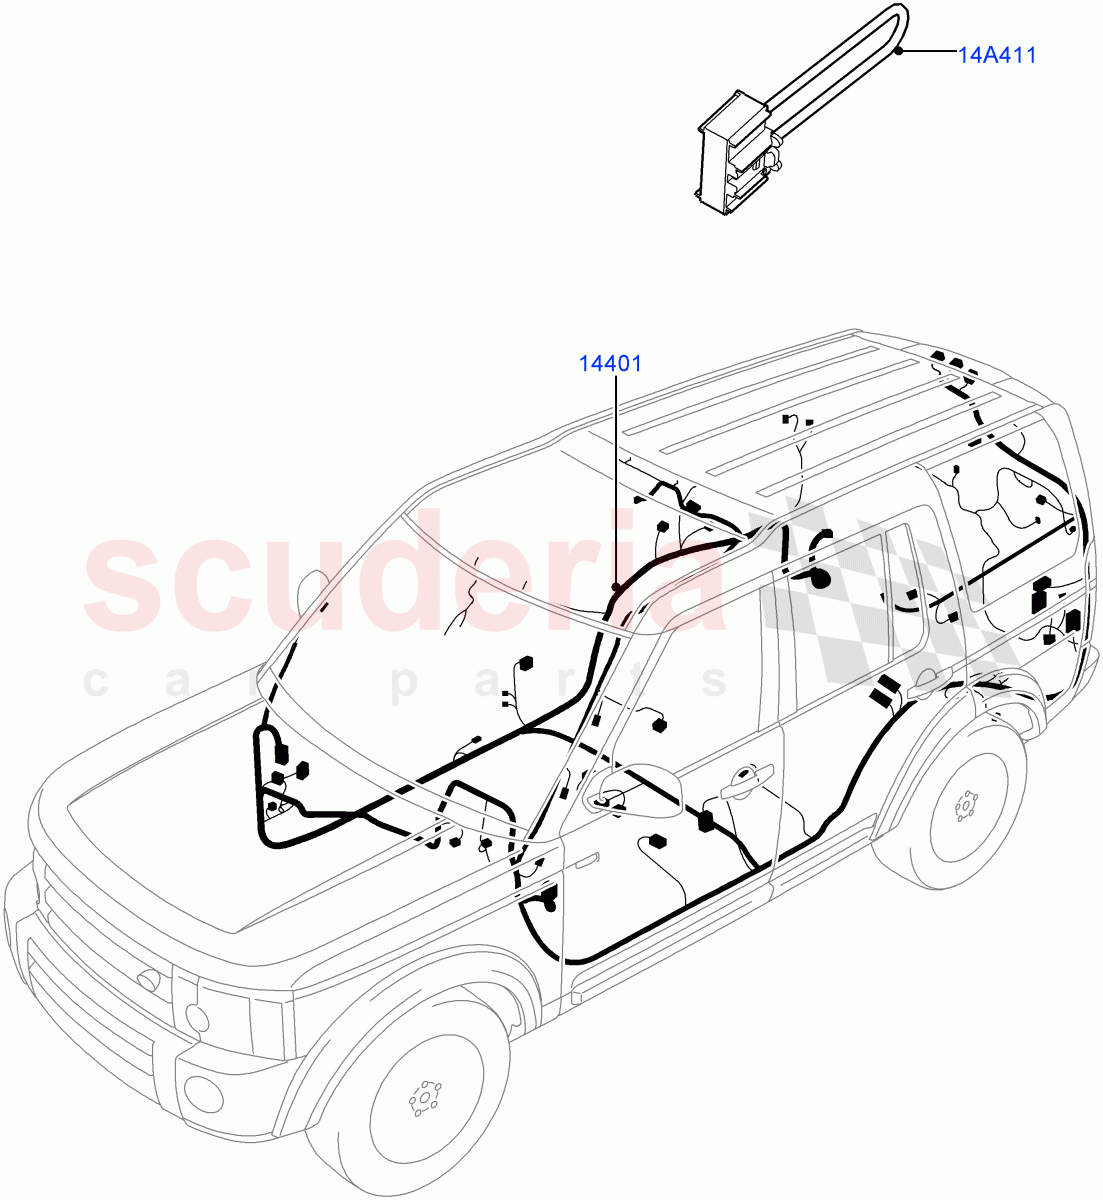 Electrical Wiring - Engine And Dash(Main Harness)((V)FROMCA000001,(V)TOFA999999) of Land Rover Land Rover Discovery 4 (2010-2016) [2.7 Diesel V6]